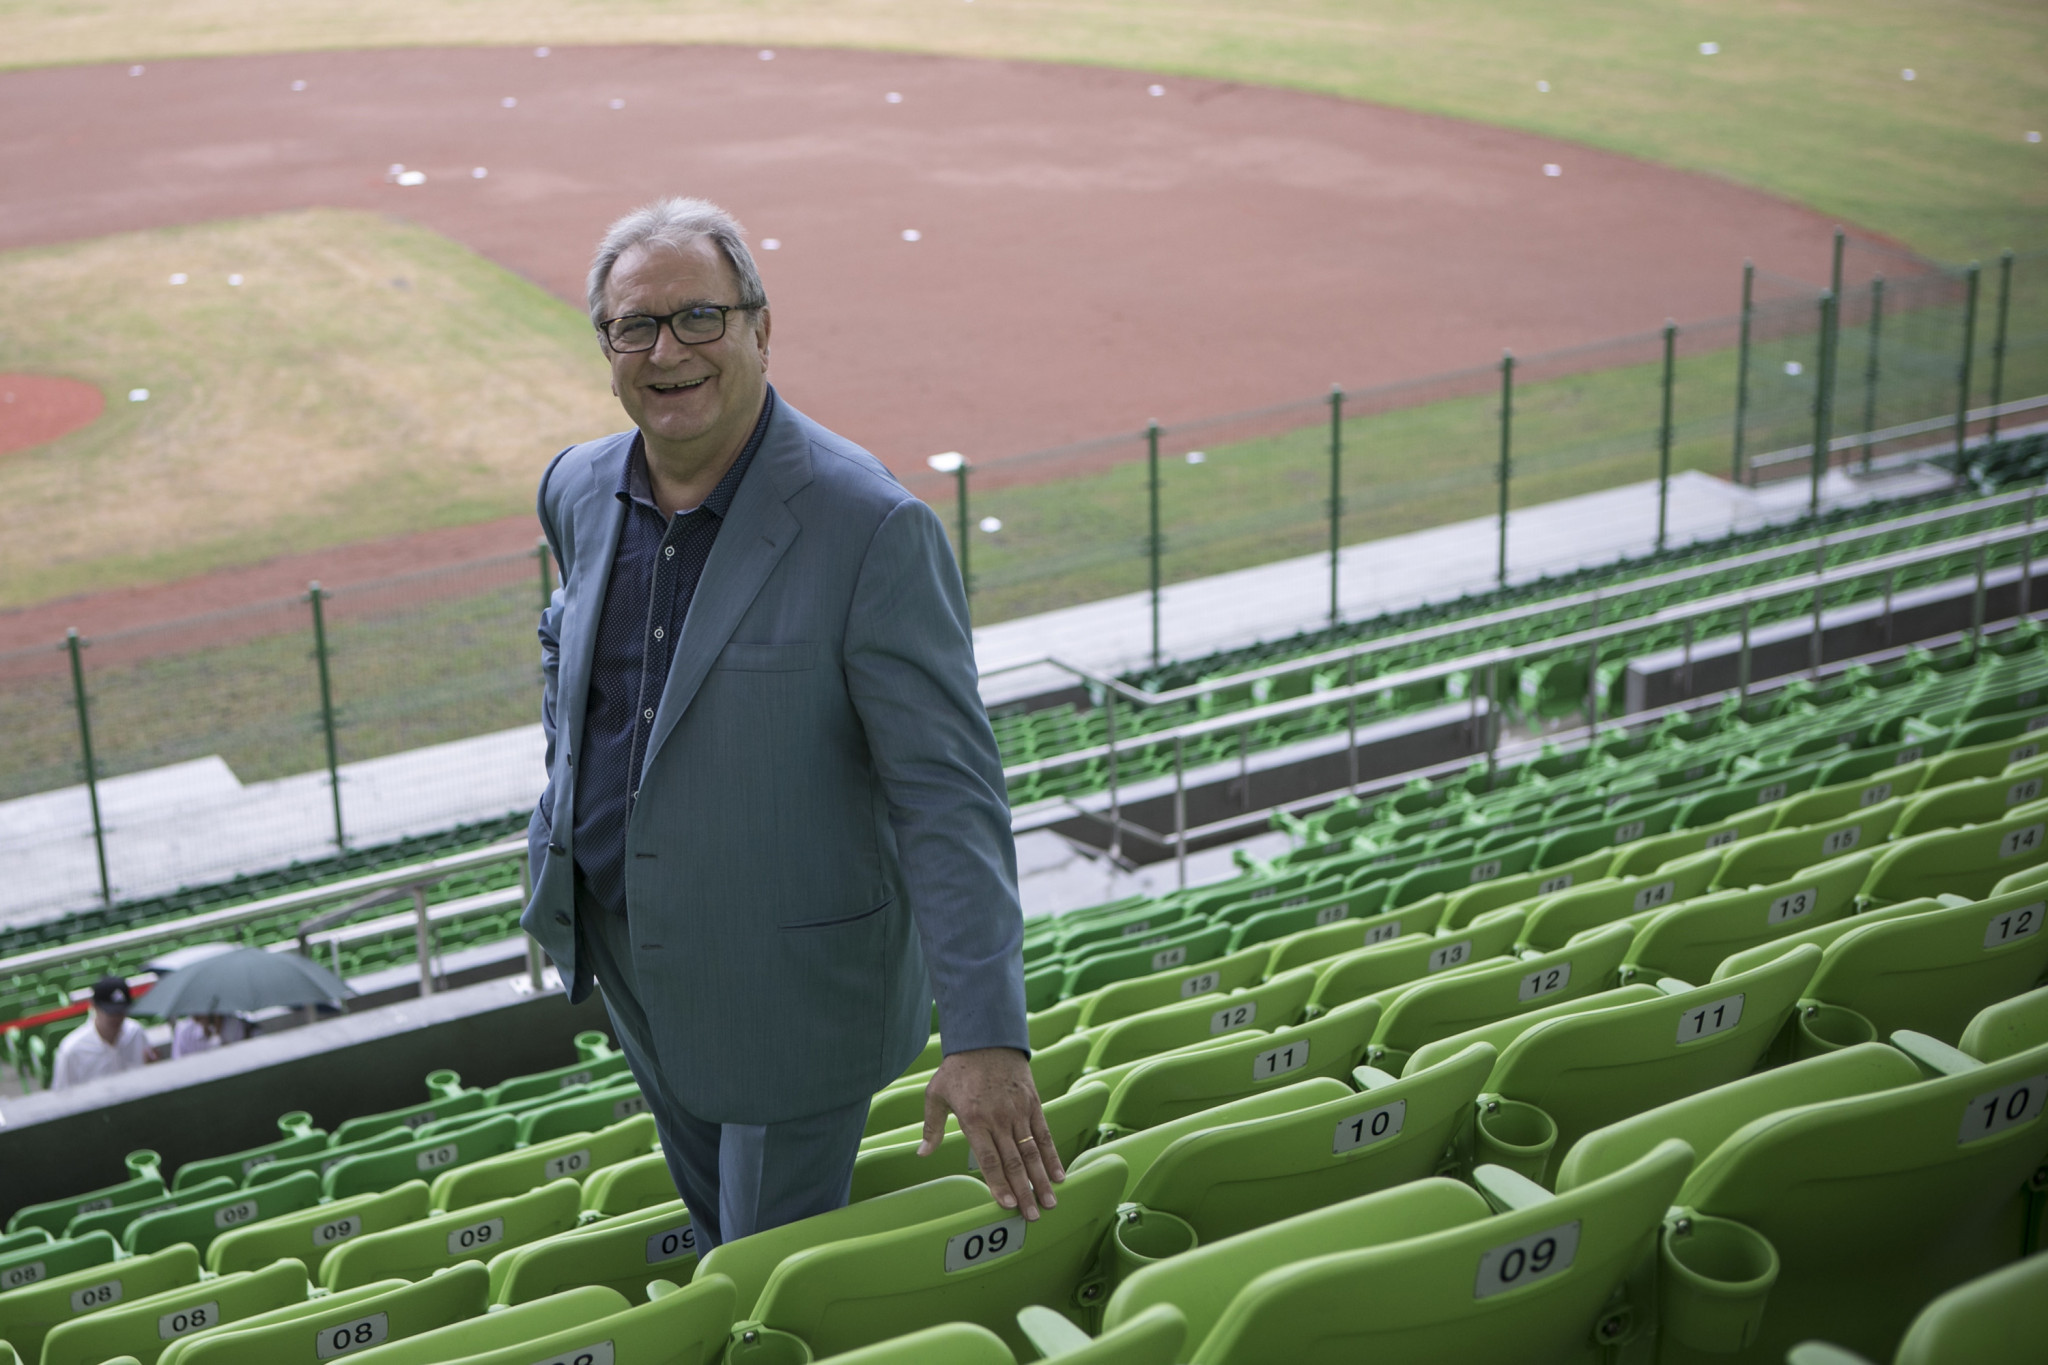 WBSC President Fraccari underlines commitment to connecting young people with baseball and softball